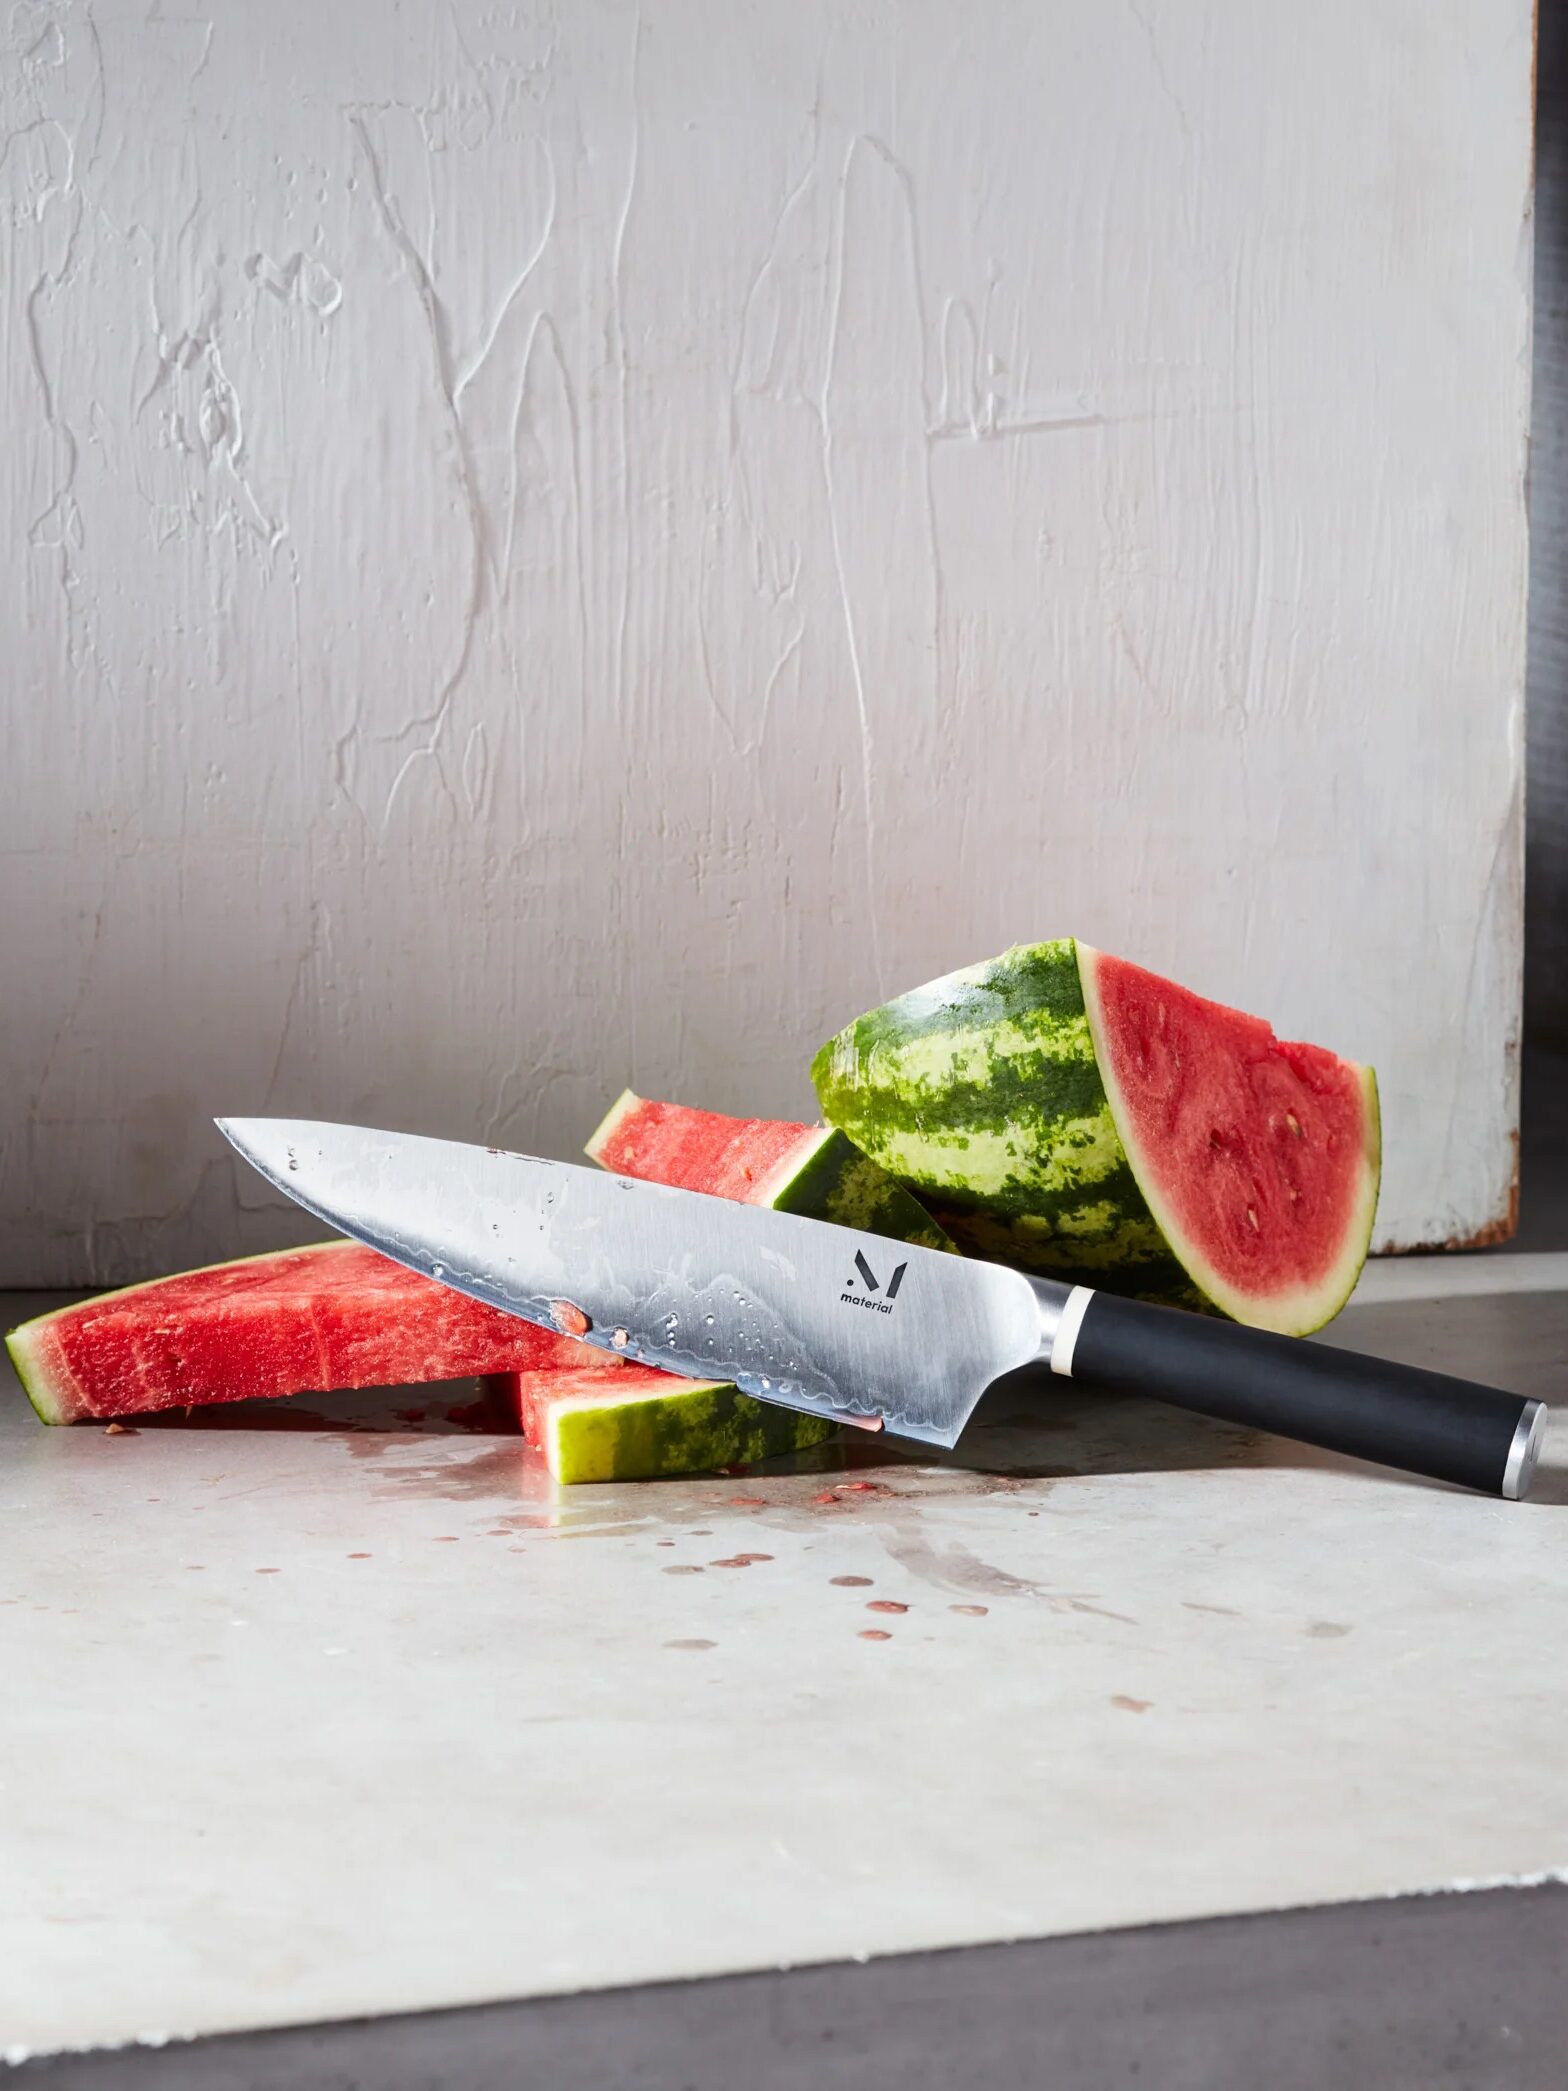 Kitchen knife and freshly cut slices of watermelon on a concrete surface, with light casting shadows on the background wall.